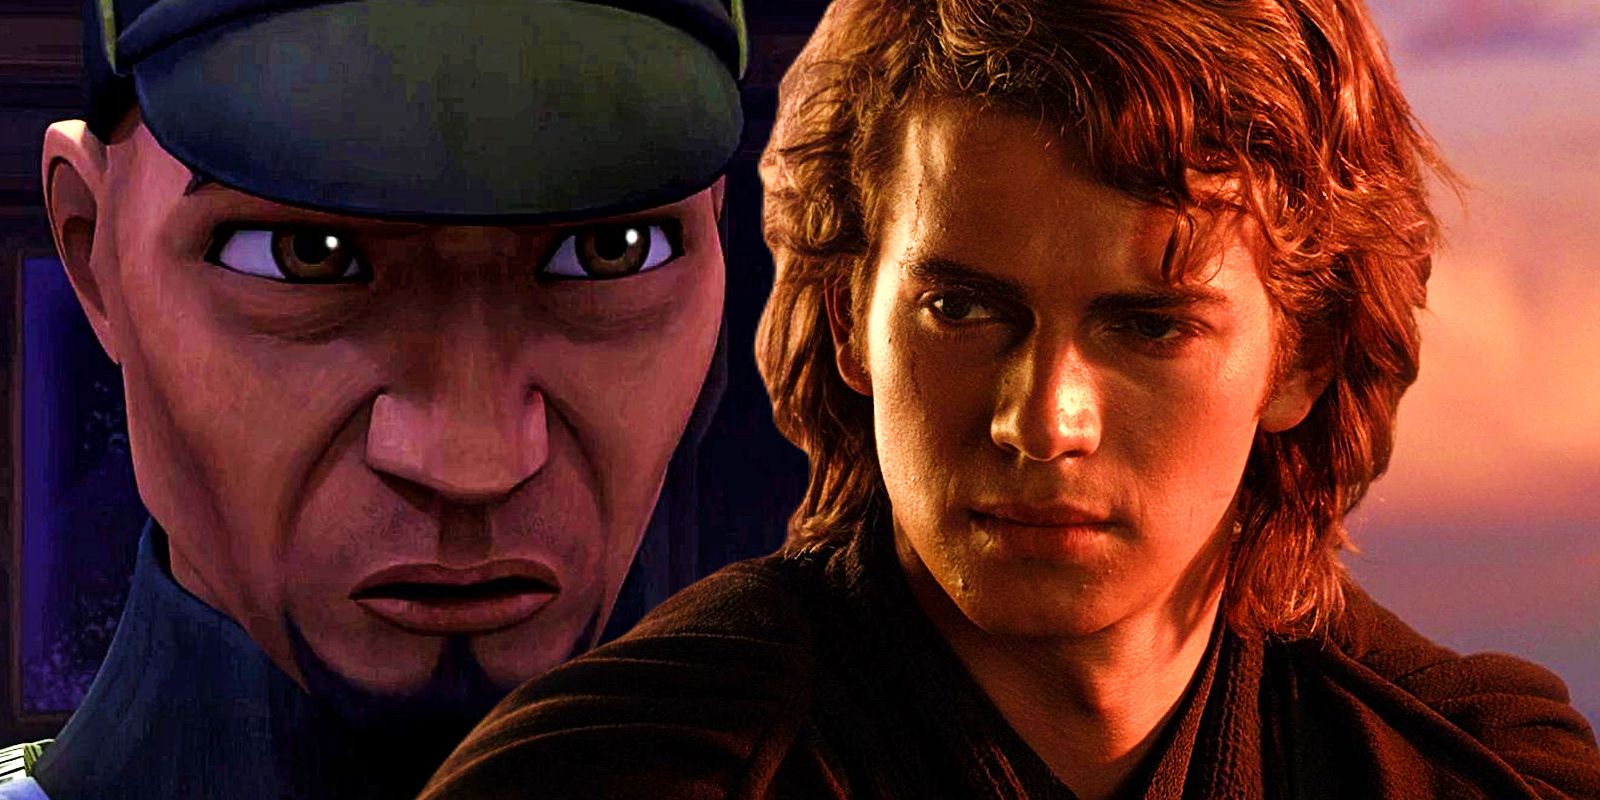 Fives in Clone Wars and Anakin in Revenge of the Sith